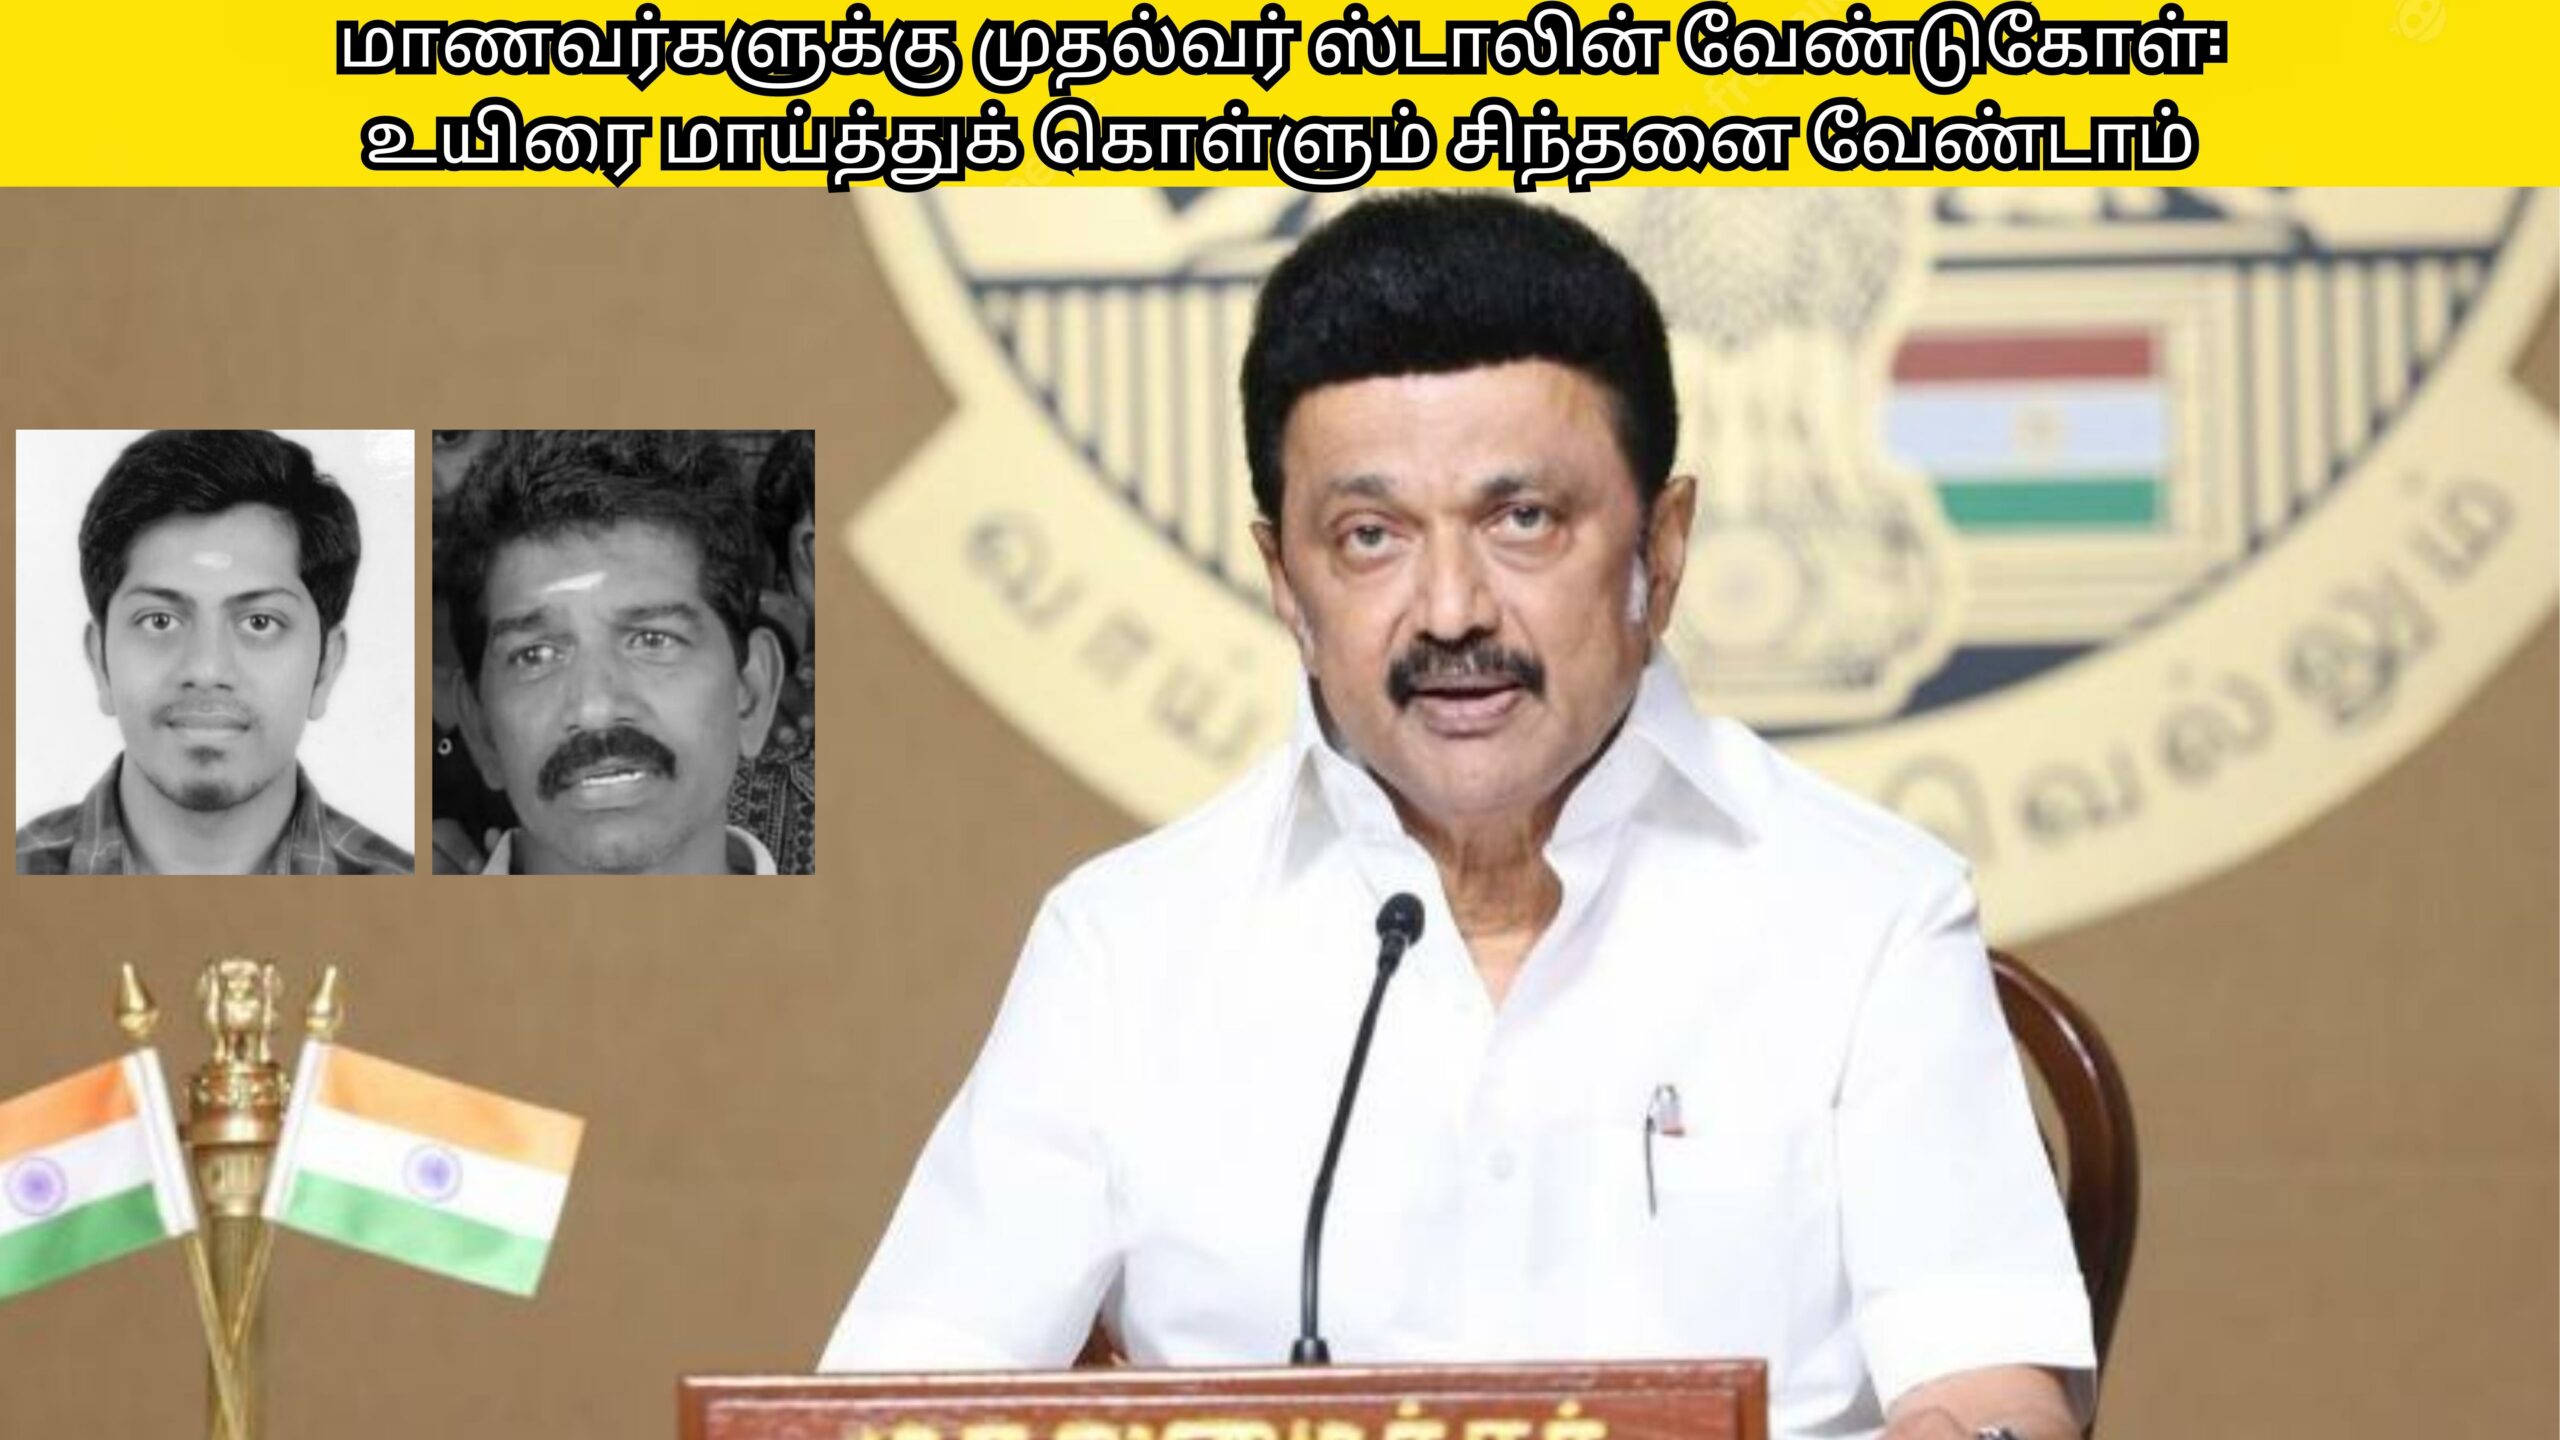 Chief Minister Stalin's appeal to the students - Platform Tamil